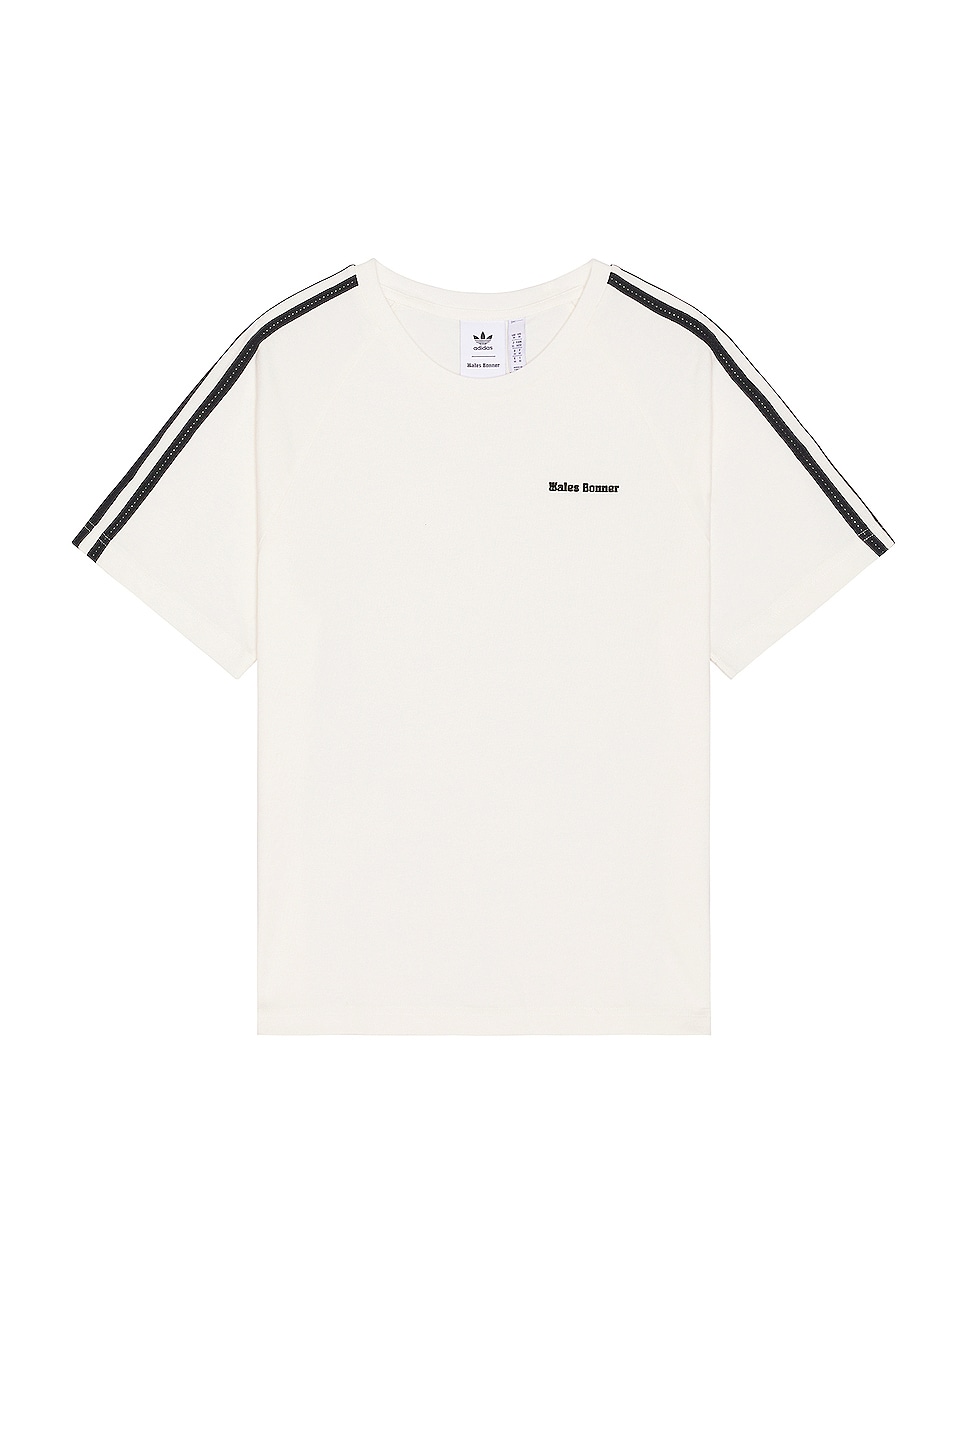 Image 1 of adidas by Wales Bonner T-shirt in Chalk White